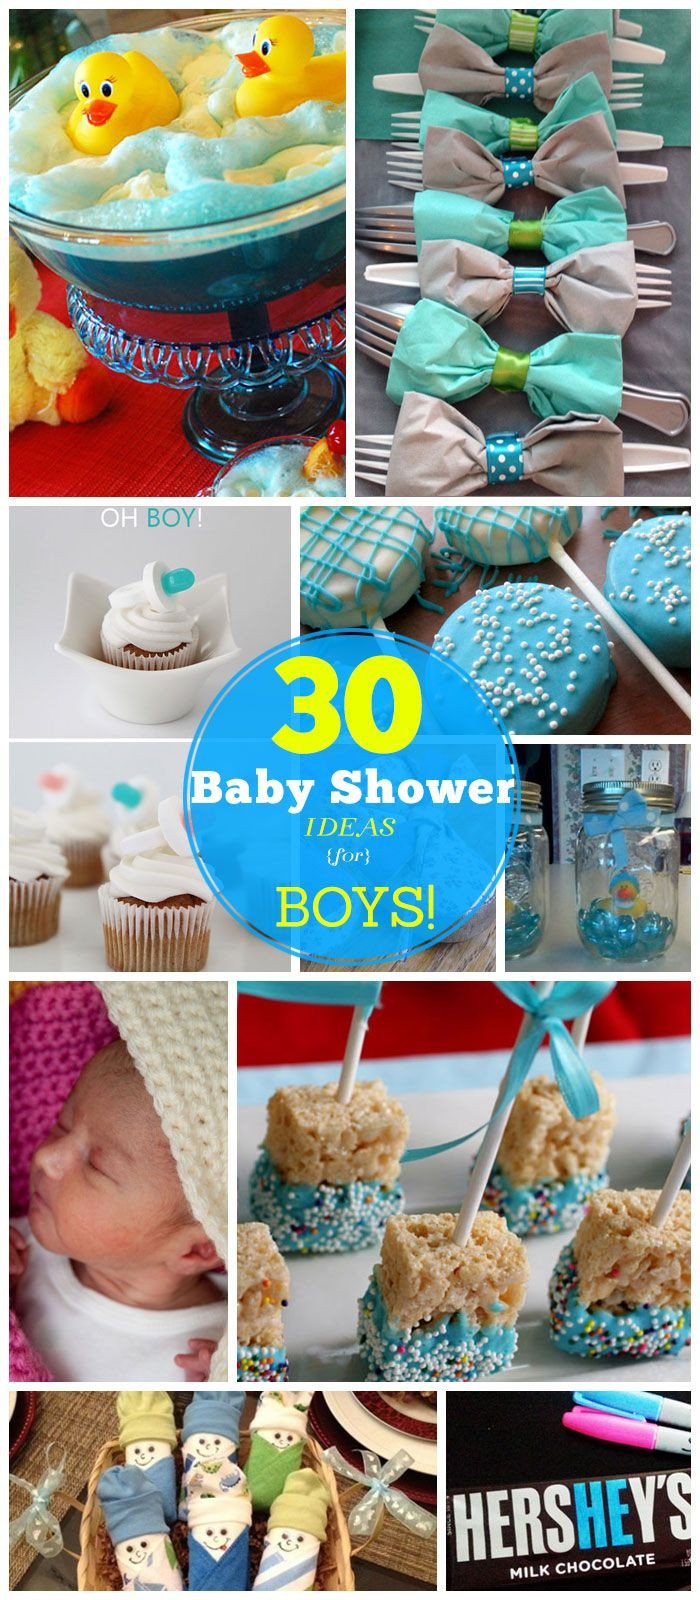 DIY Baby Shower Decorations For A Boy
 20 DIY Baby Shower Ideas for Boys